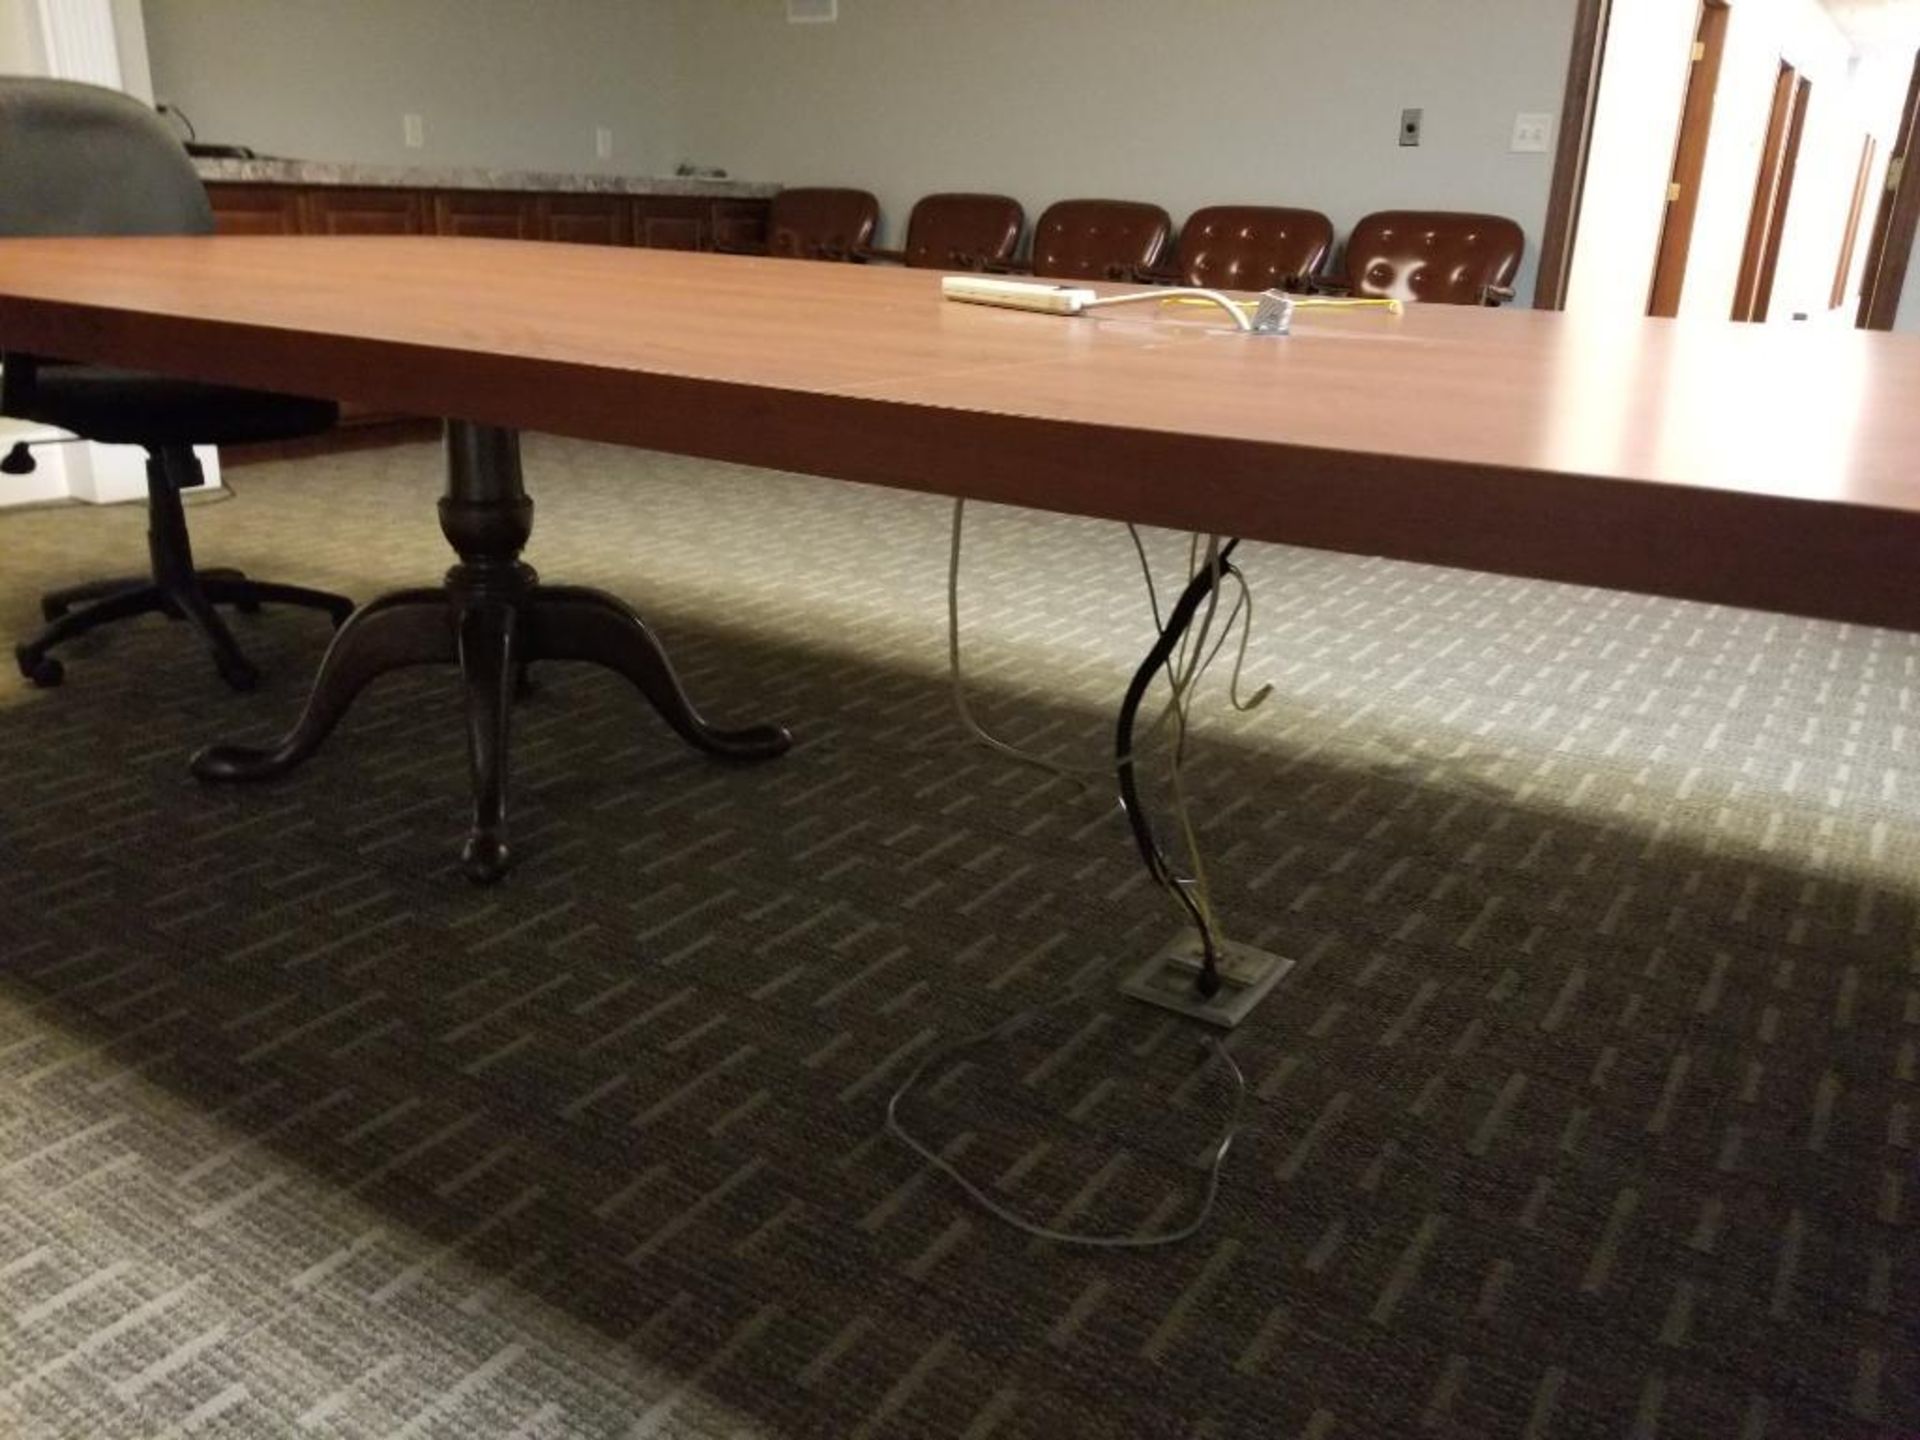 Office conference table 167x59x31 inches LxWxH. W/ two chairs. - Image 5 of 5